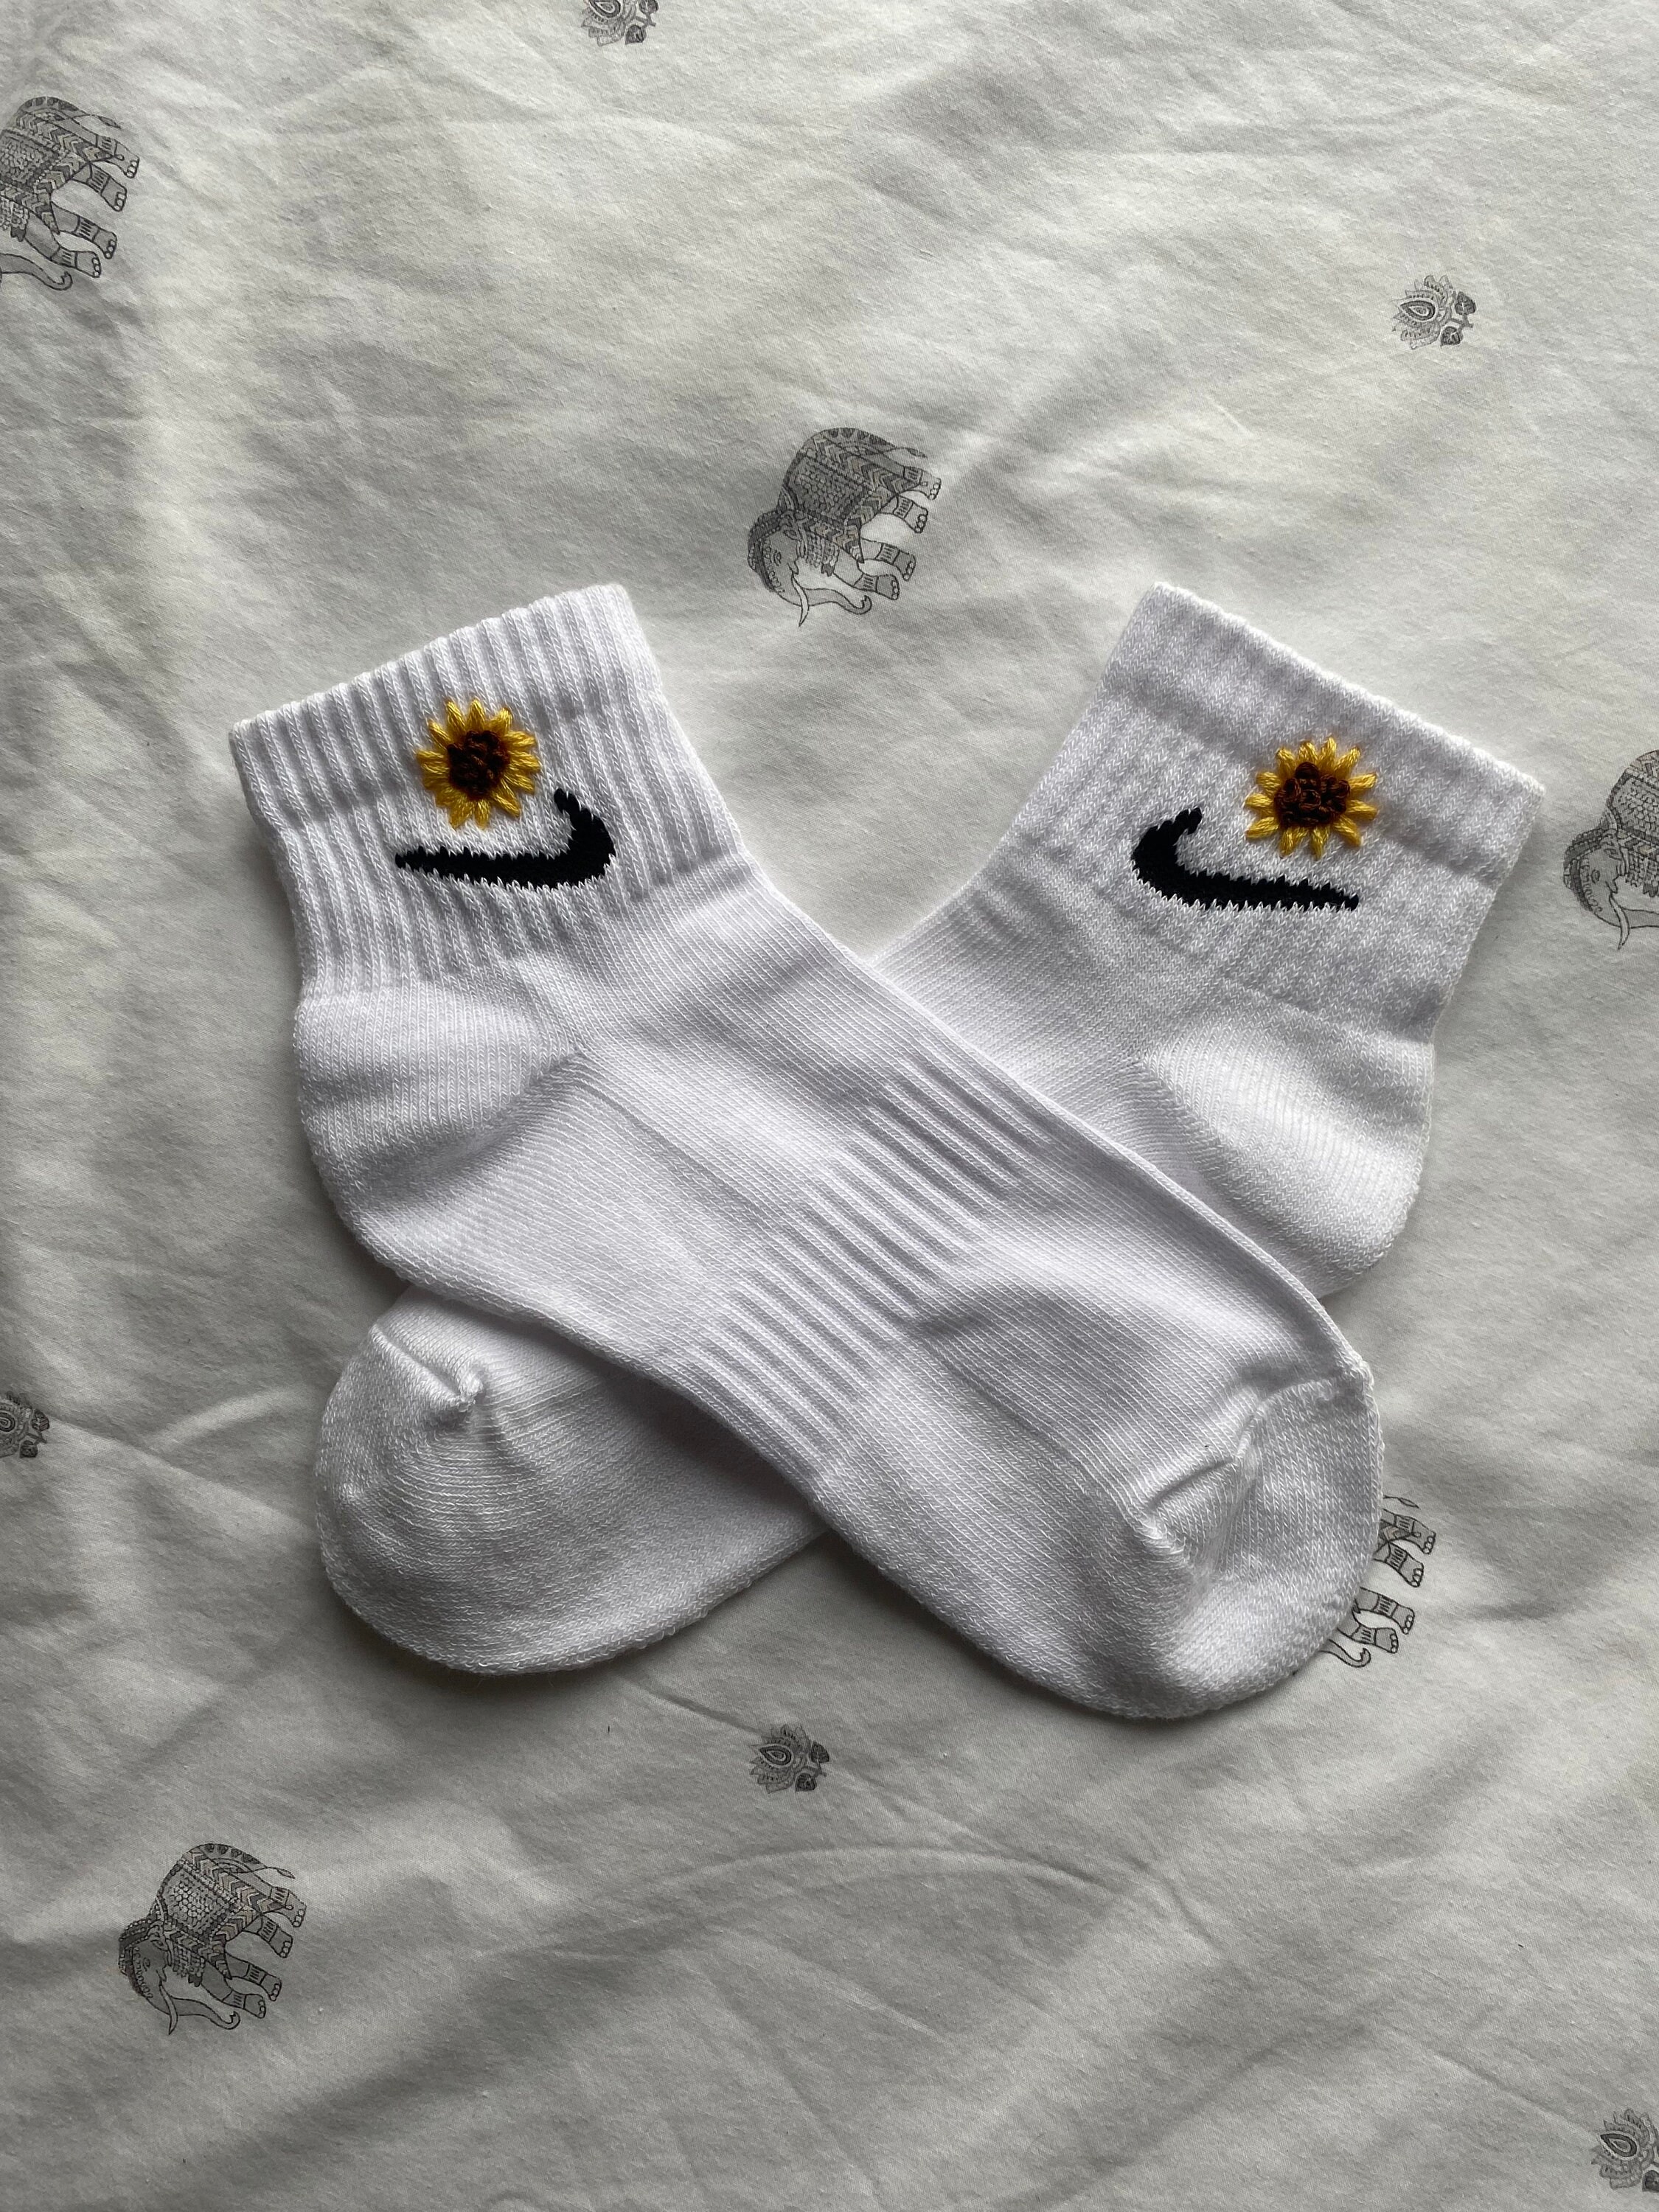 Official Nike Ankle Socks With Yellow Sunflower Embroidery - Etsy UK